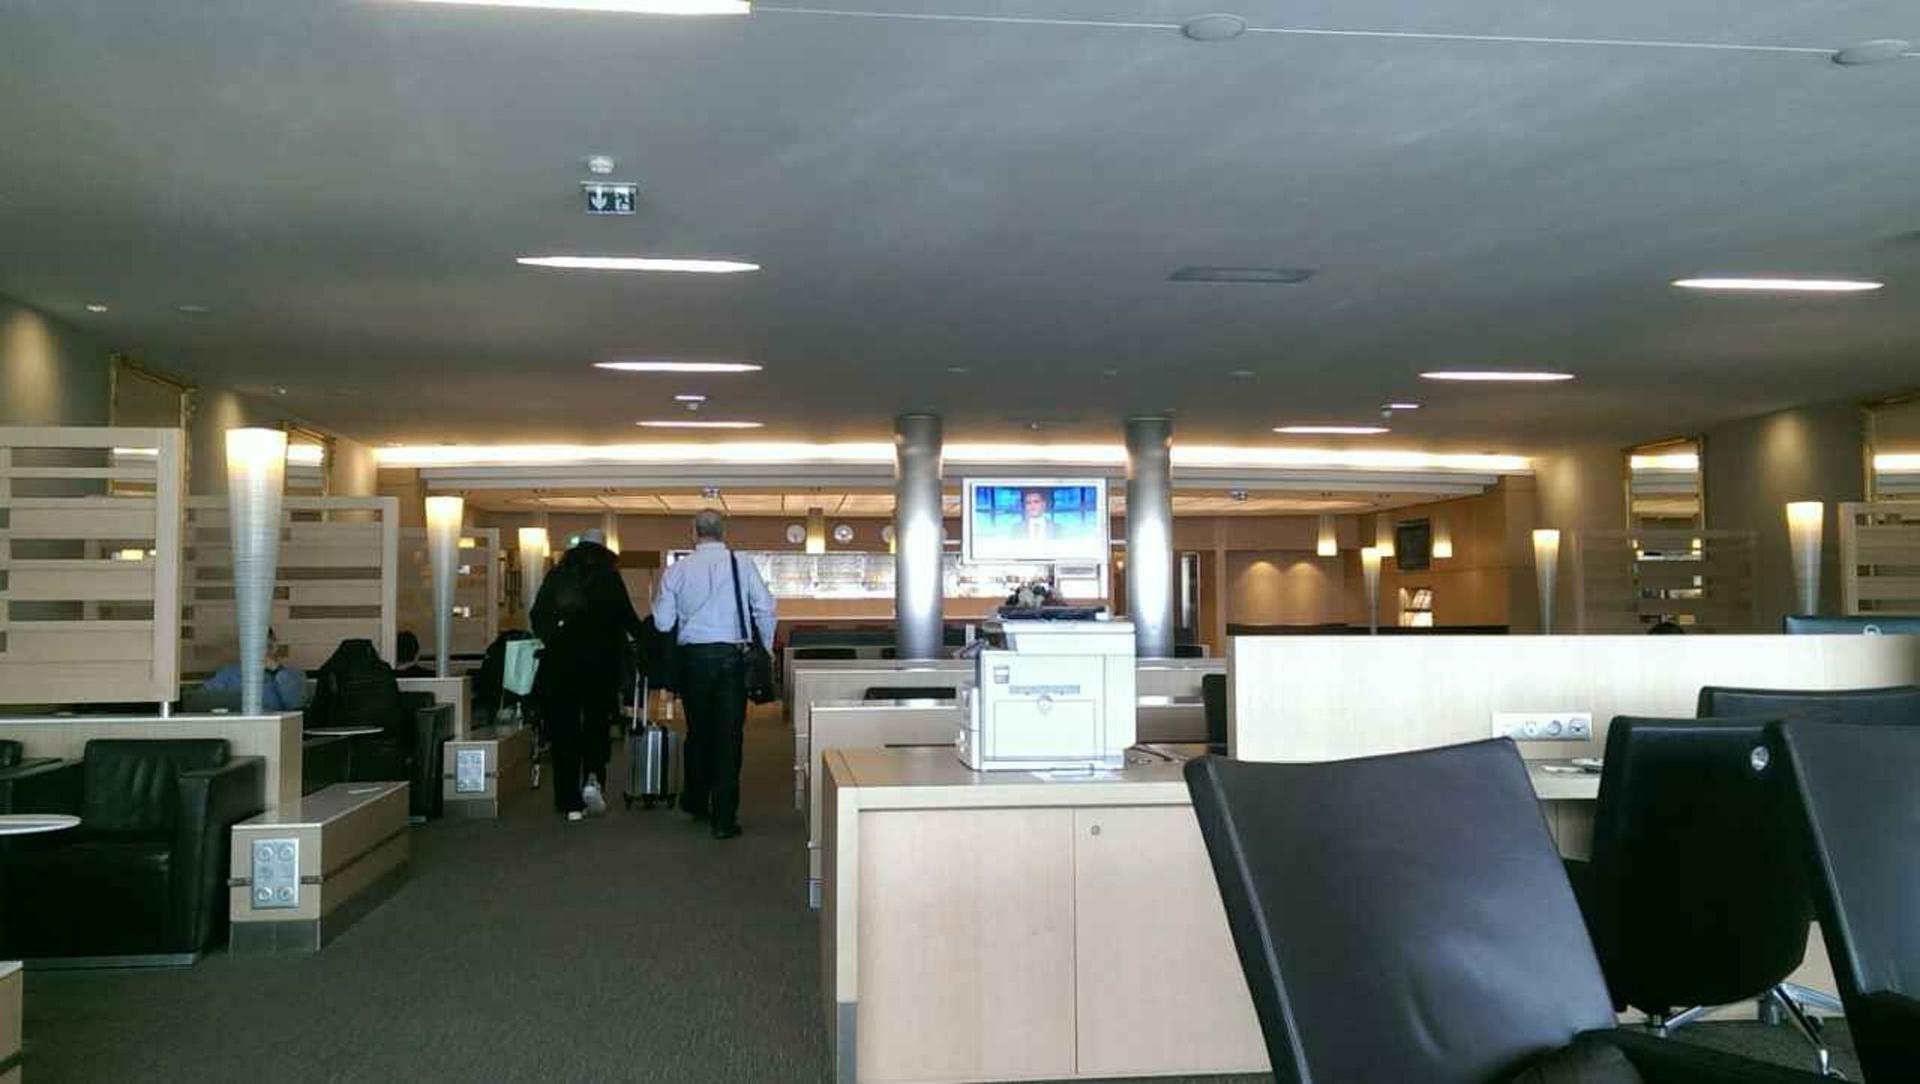 American Airlines Admirals Club  image 19 of 25